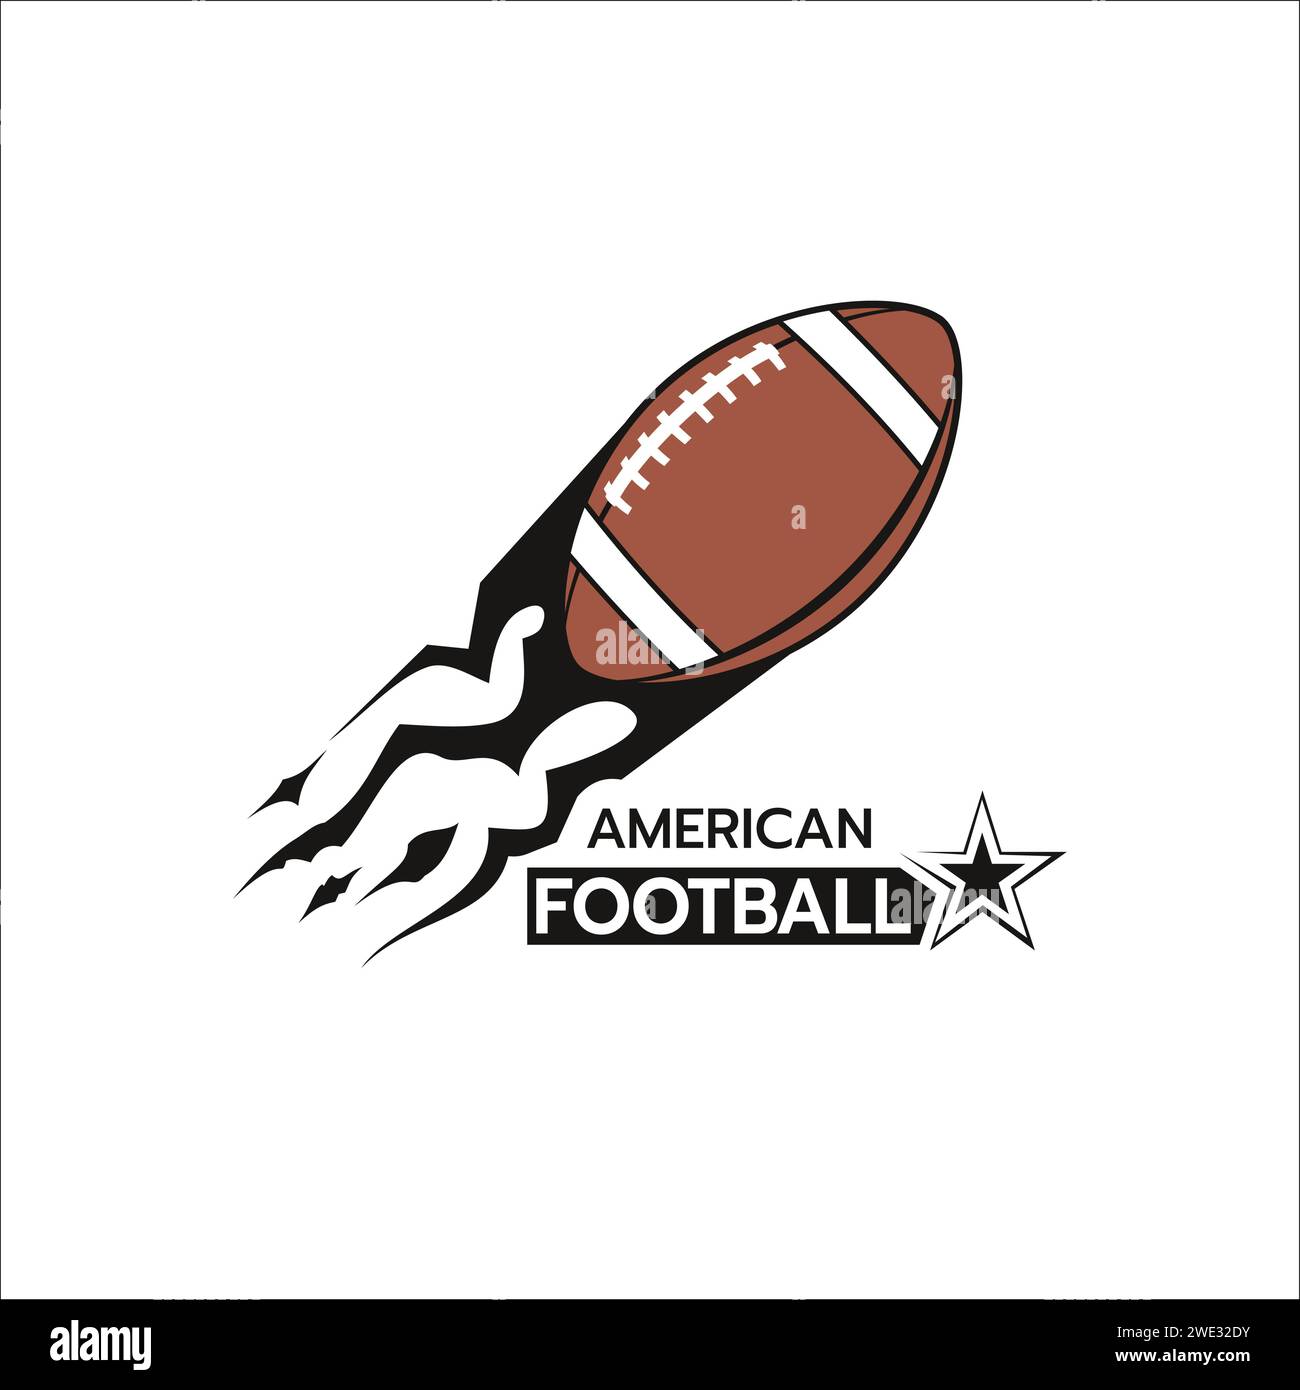 Beautiful of American football logo template,Stylized image of football logo icon Silhouette on white background Vector illustration Stock Vector